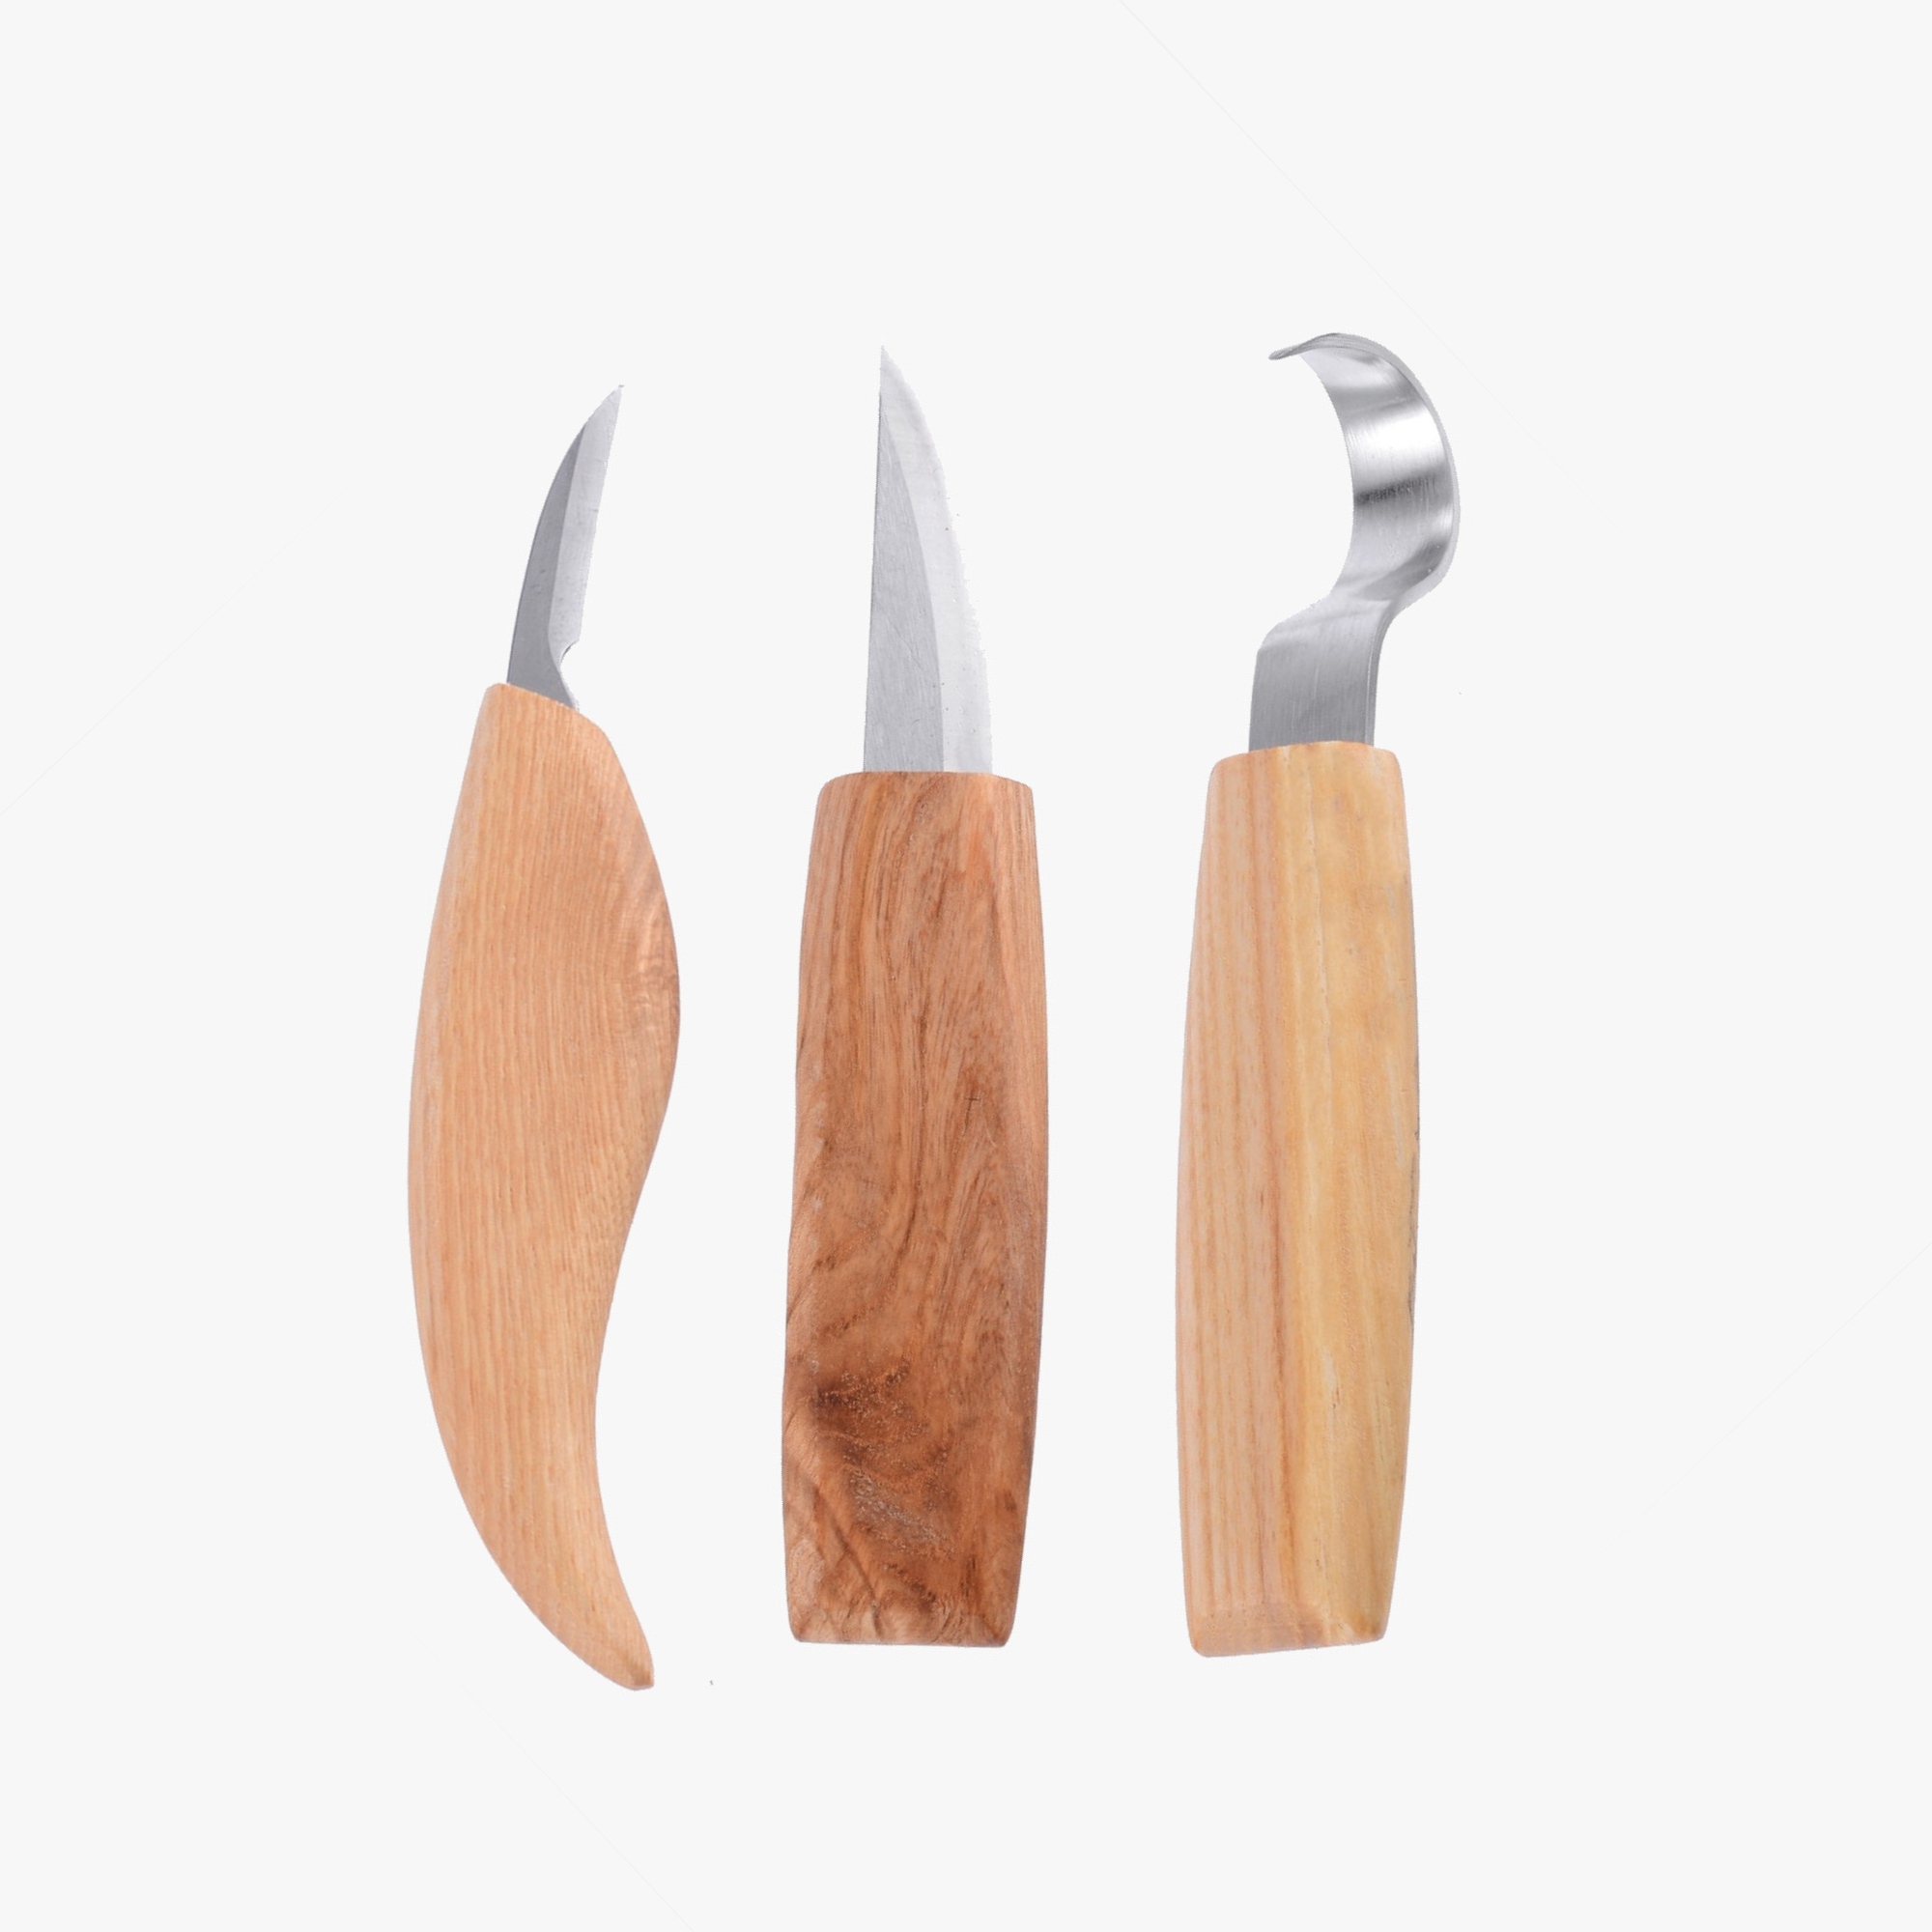 Similky Wood Carving Tools 5 In 1 Knife Set - Includes Hook Knife